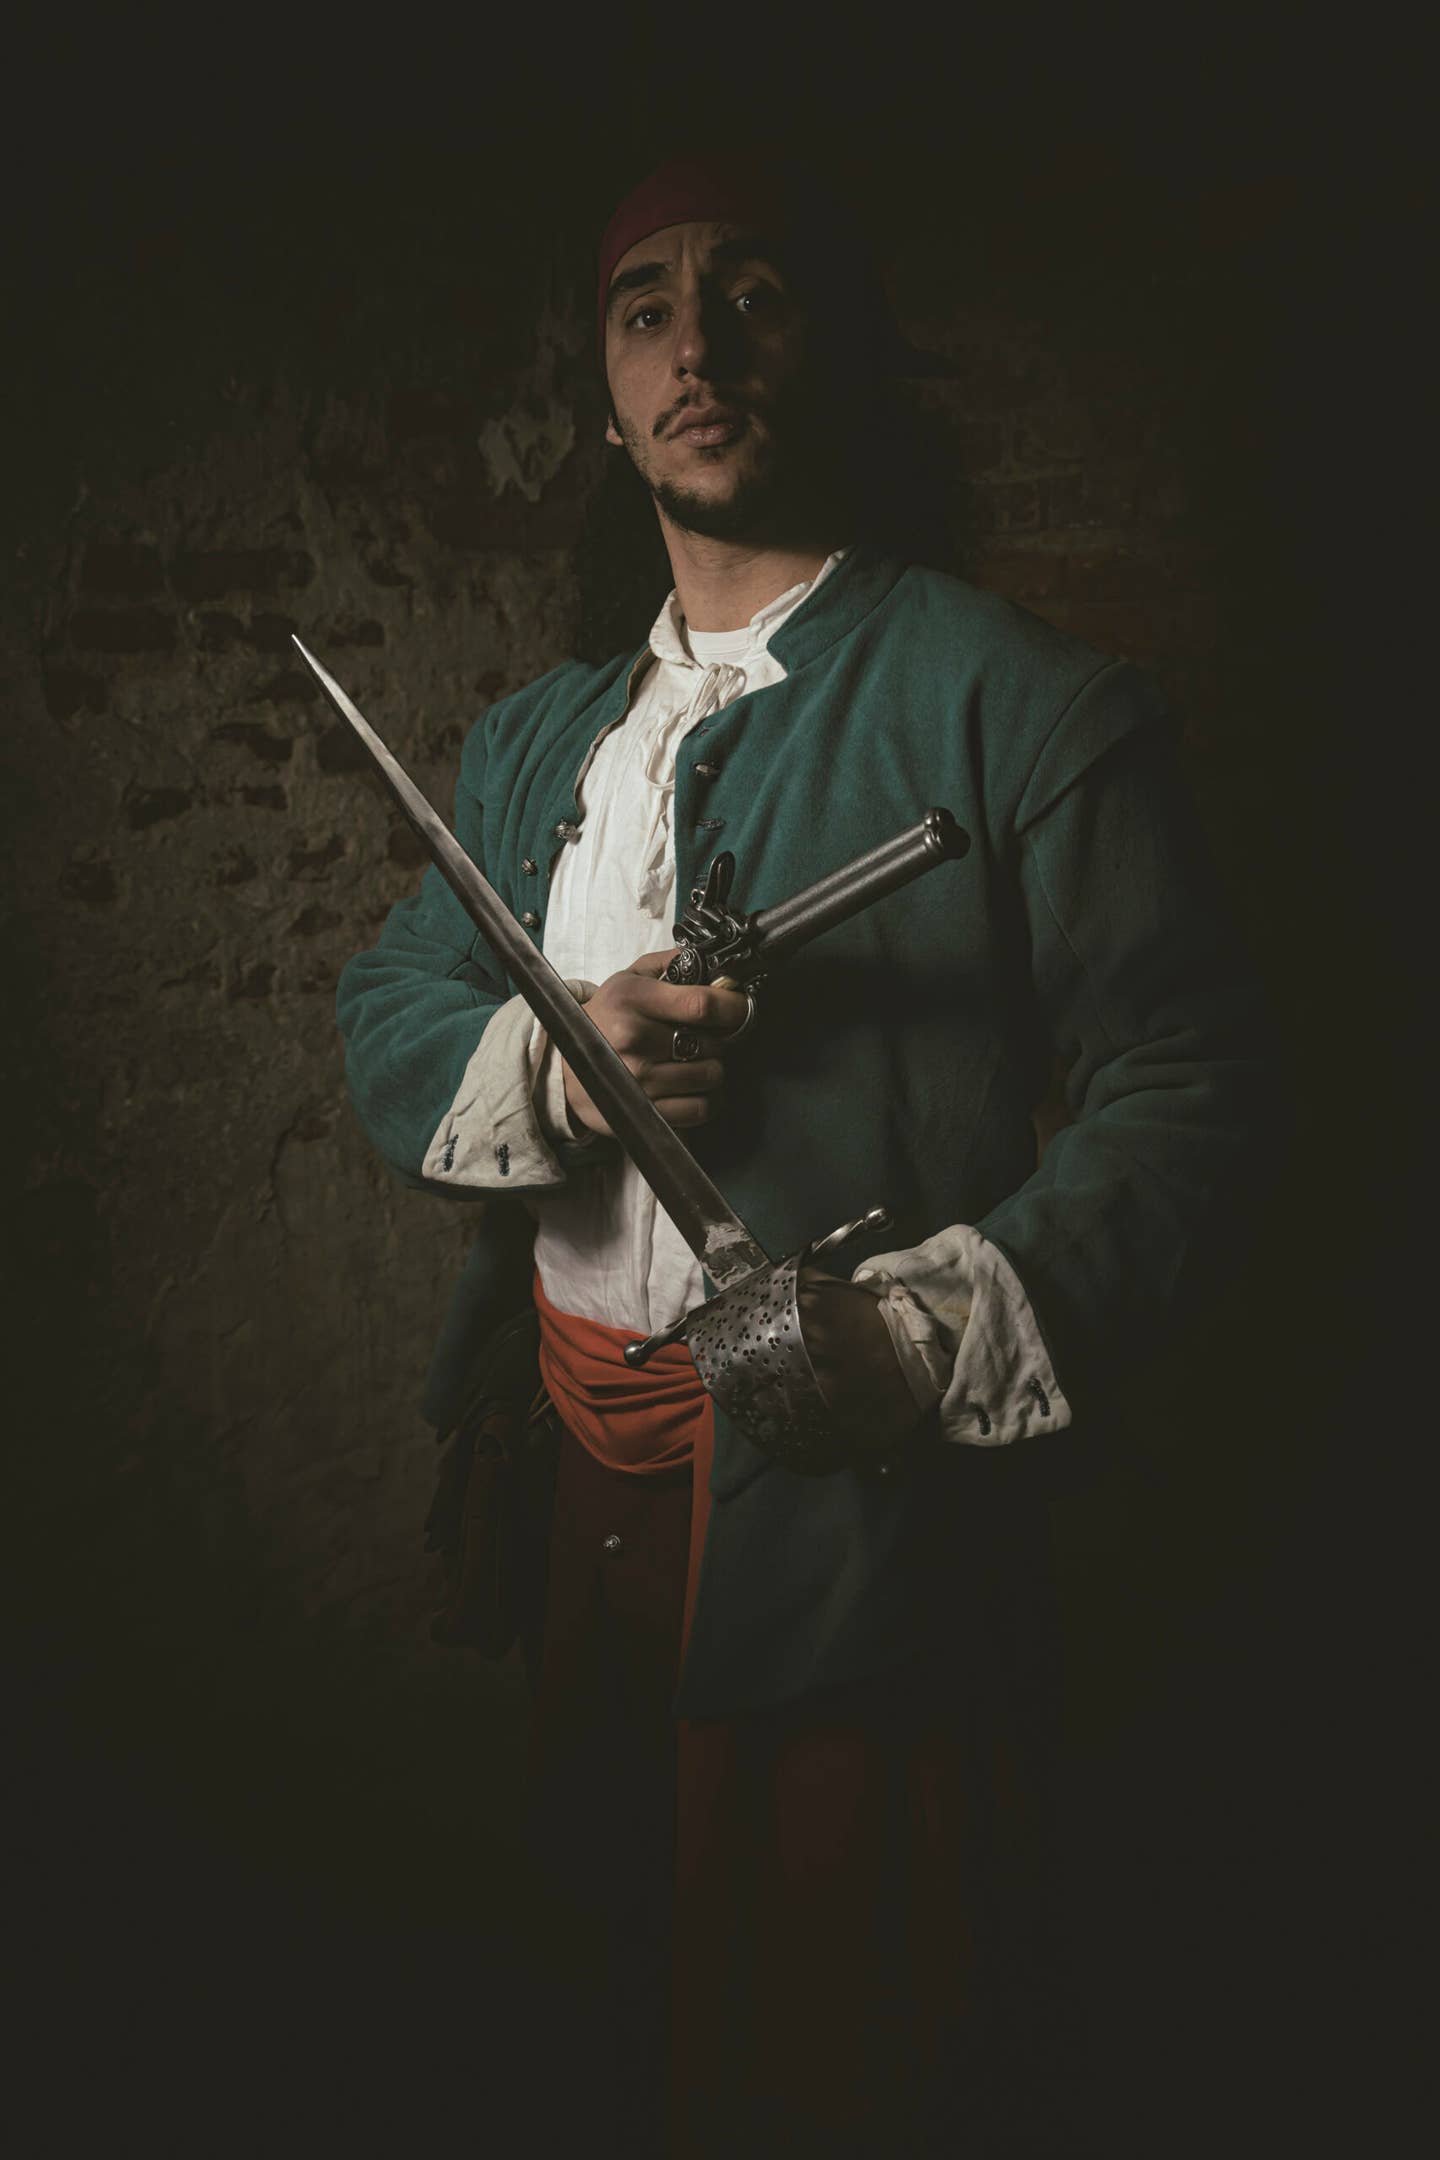 Another hypothetical reenactment of an English pirate in the Caribbean, sometime between 1680 and 1720. This pirate is armed with both a muzzle-loading gun and a short sword. <em>Photo by Camillo Balossini/Associazione Culturale Crapa de Mort/Mondadori Portfolio via Getty Images</em>